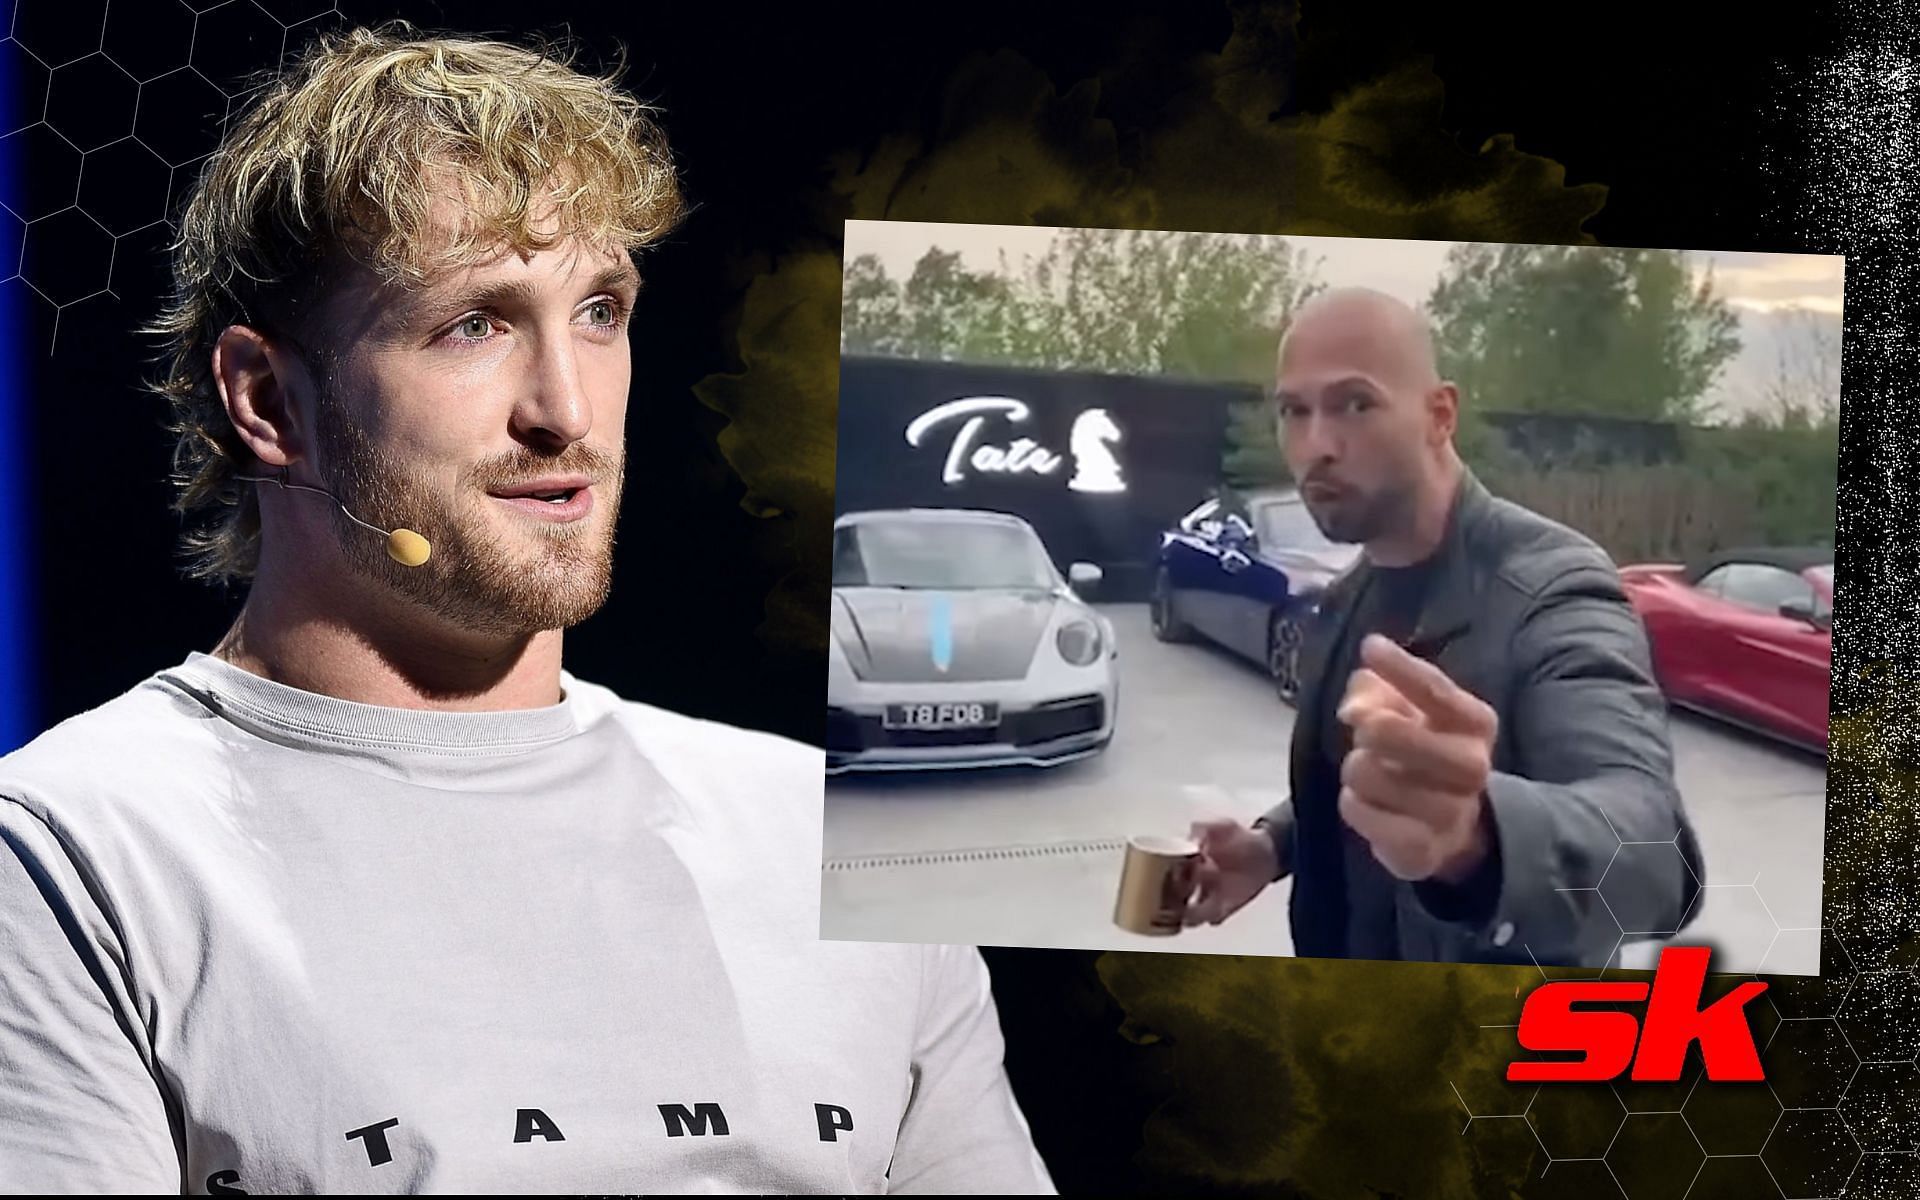 Logan Paul reveals why he “supported” Andrew Tate’s content in the past